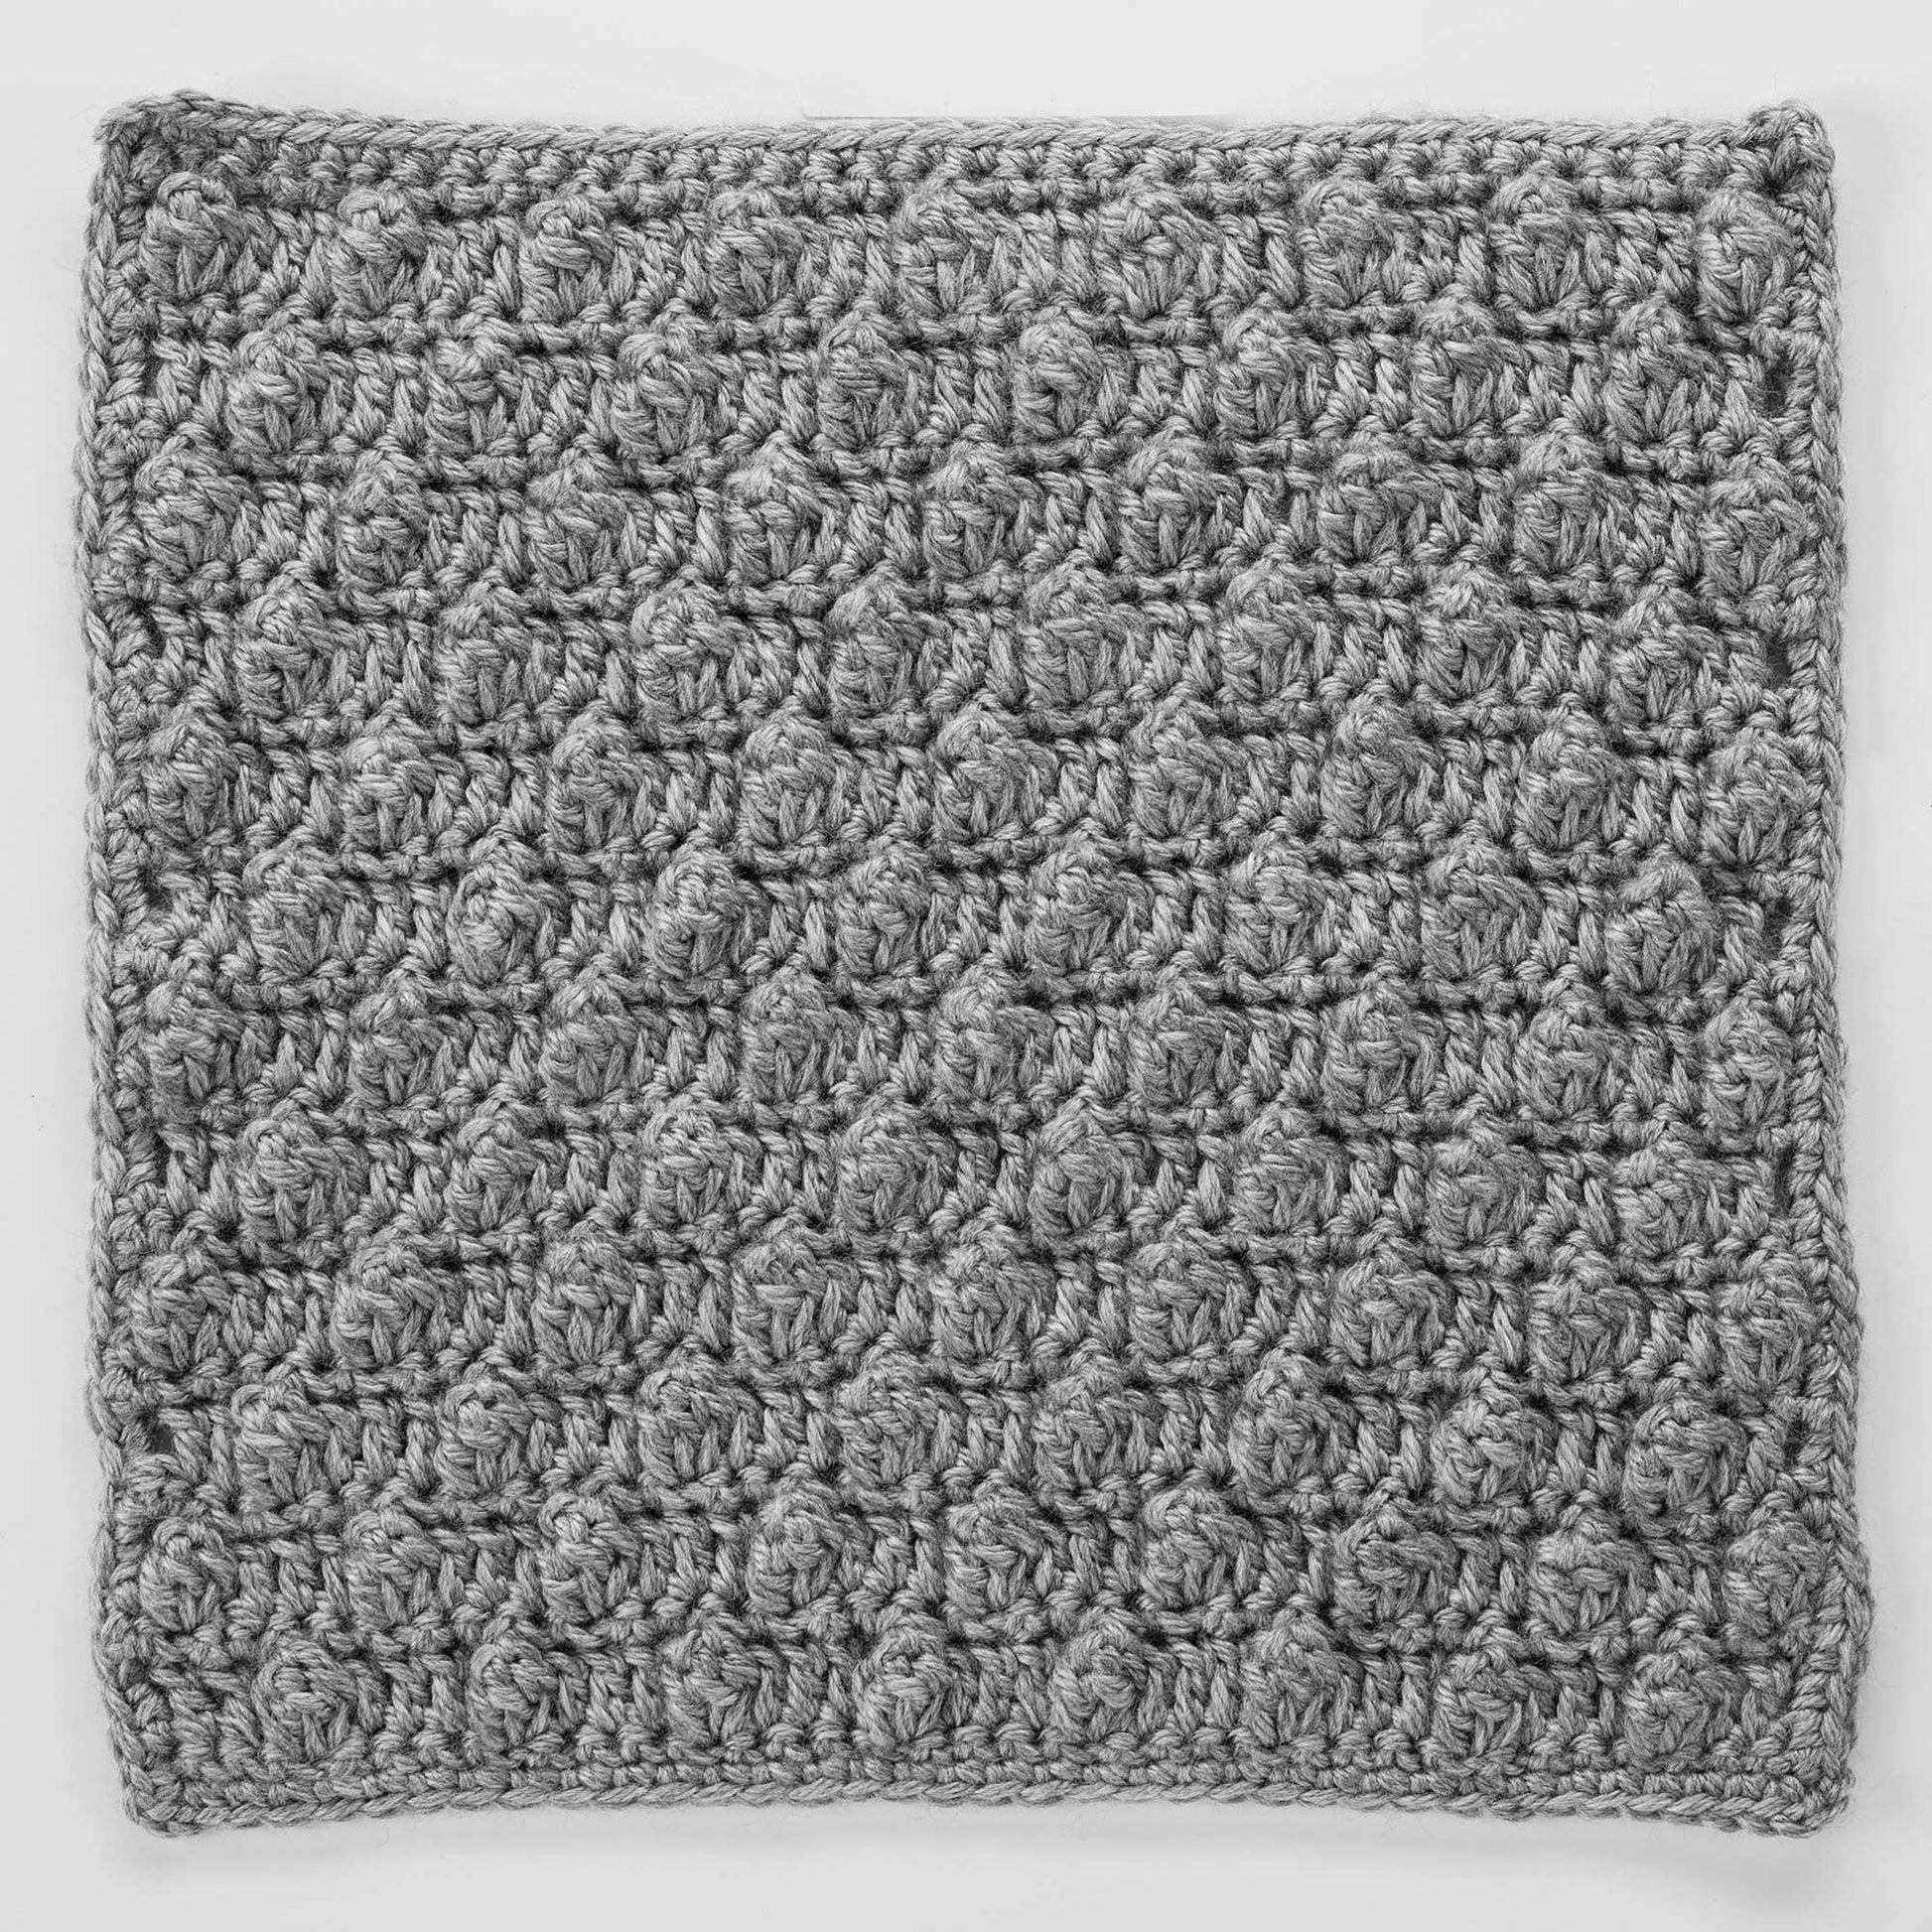 Free Red Heart Popcorn Square For Checkerboard Textures Throw Crochet Pattern